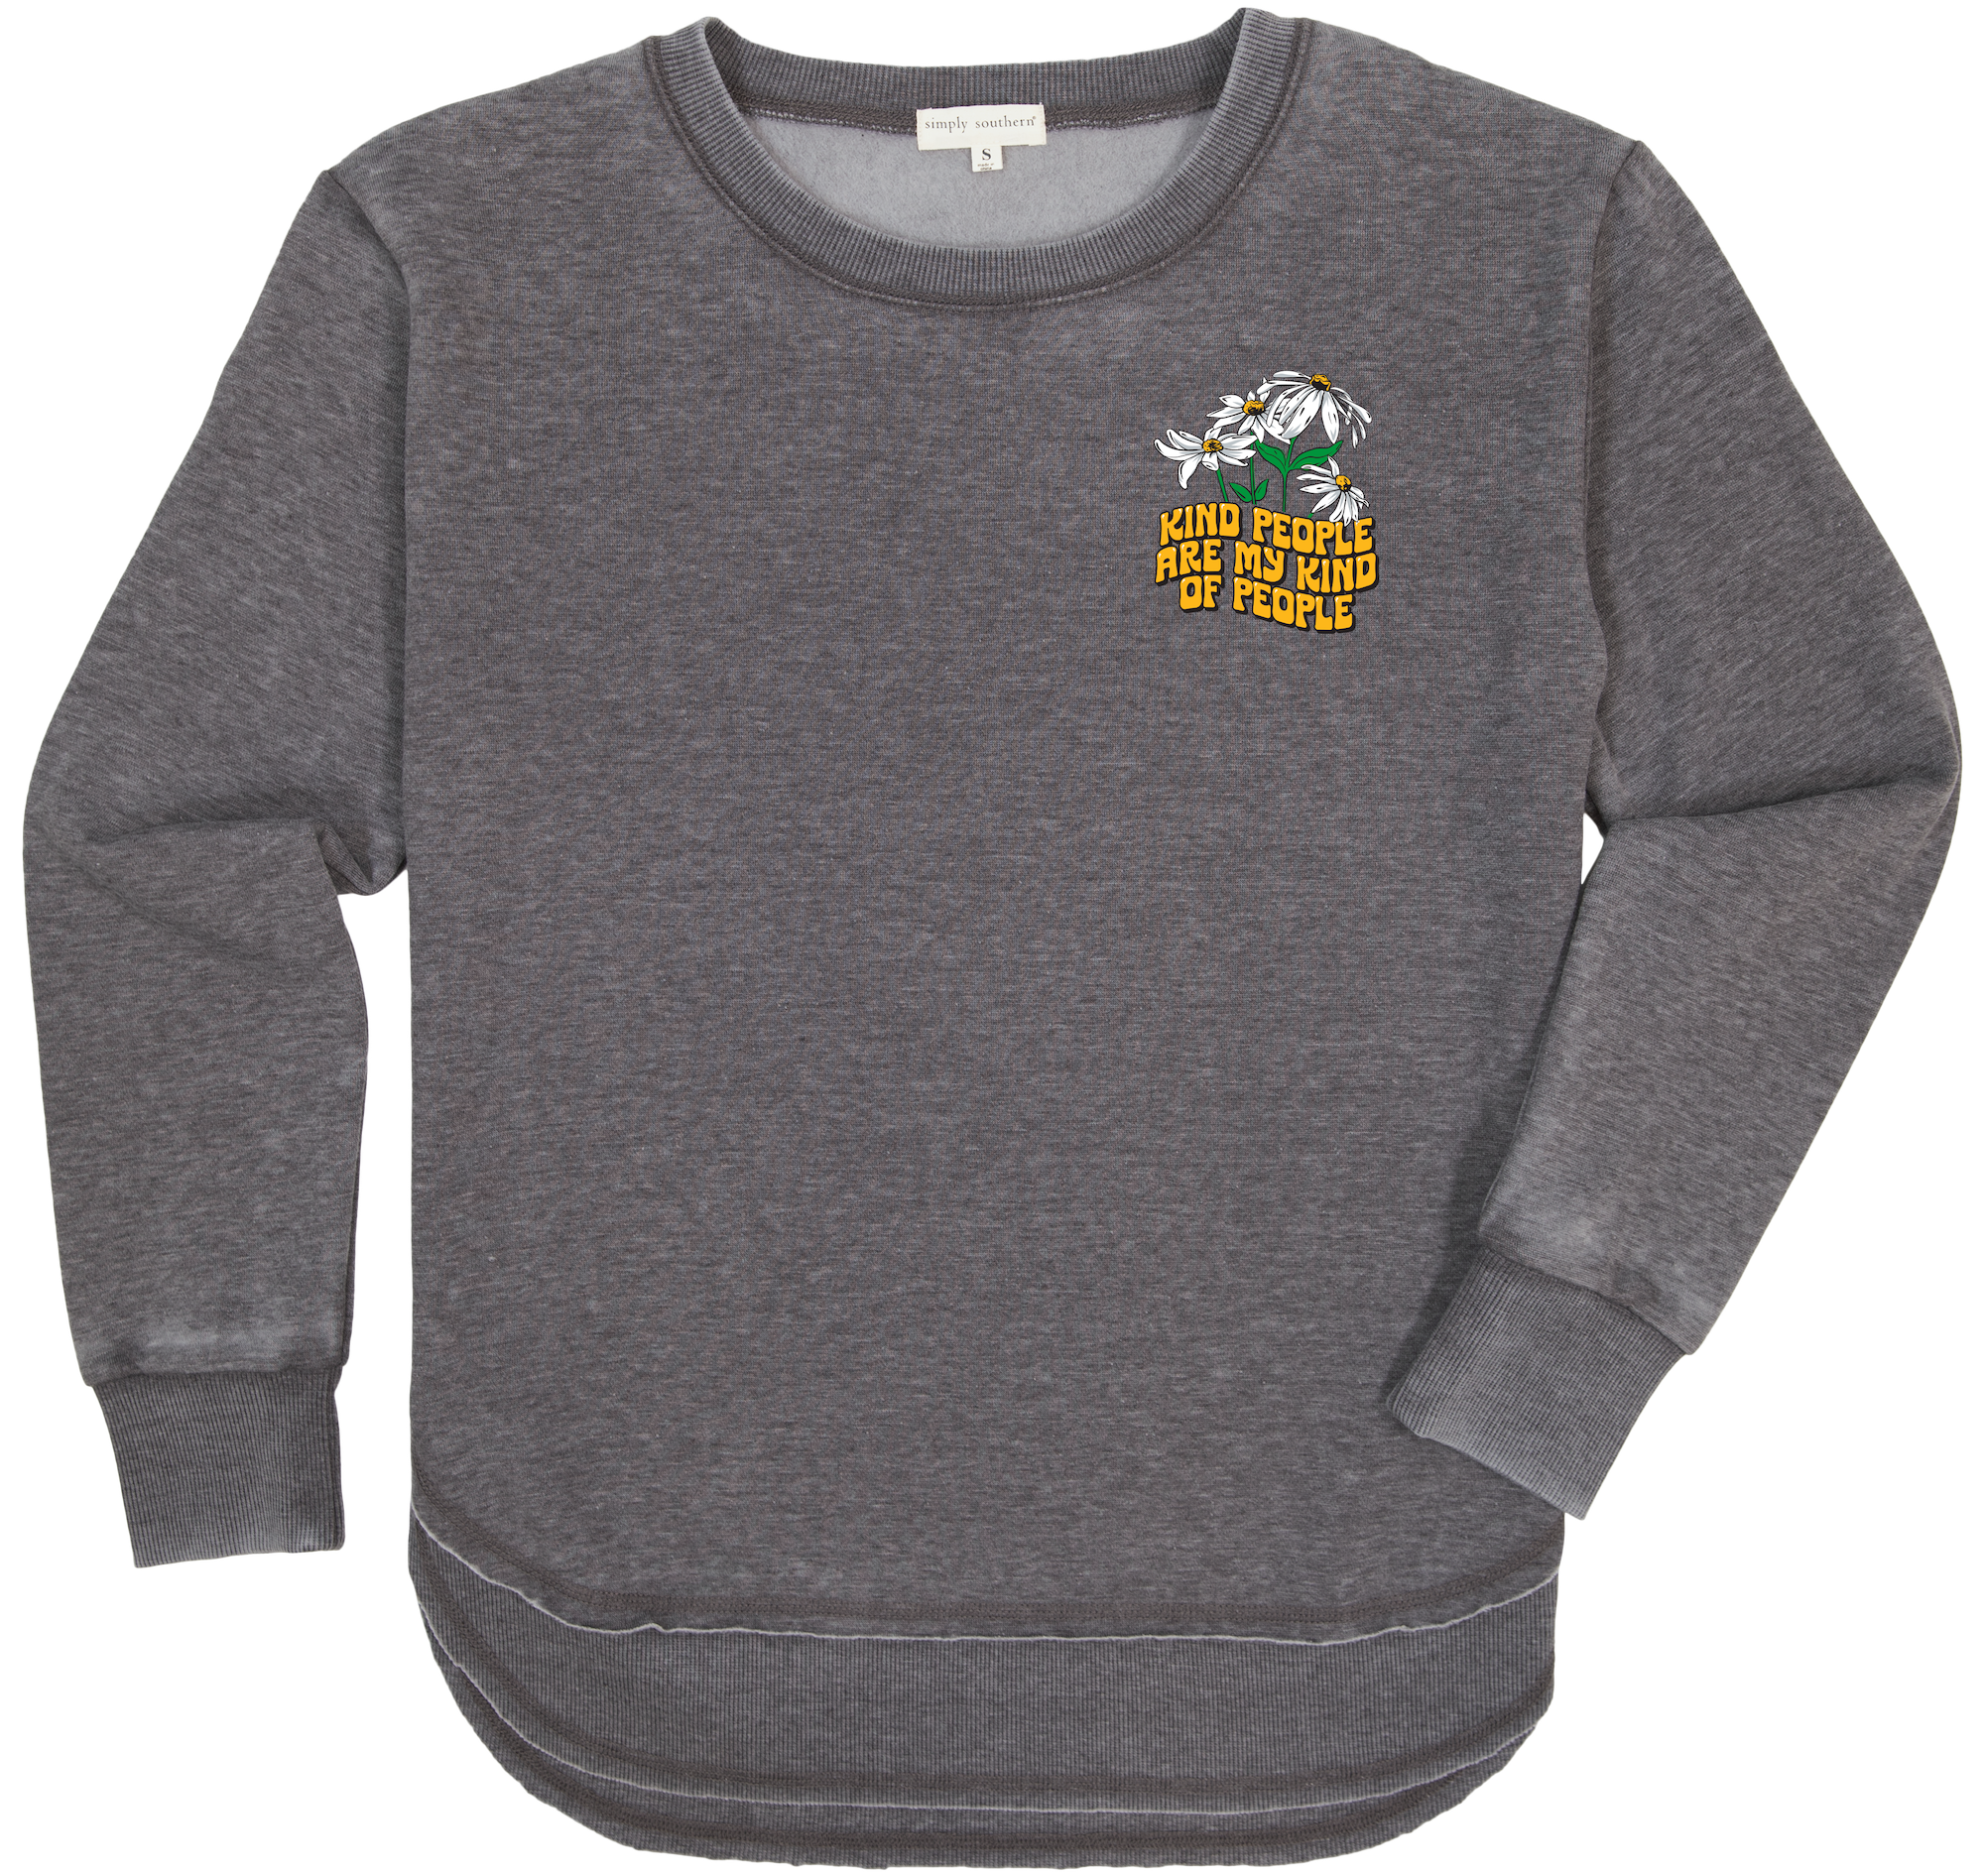 'Kind People' Crewneck Pullover by Simply Southern